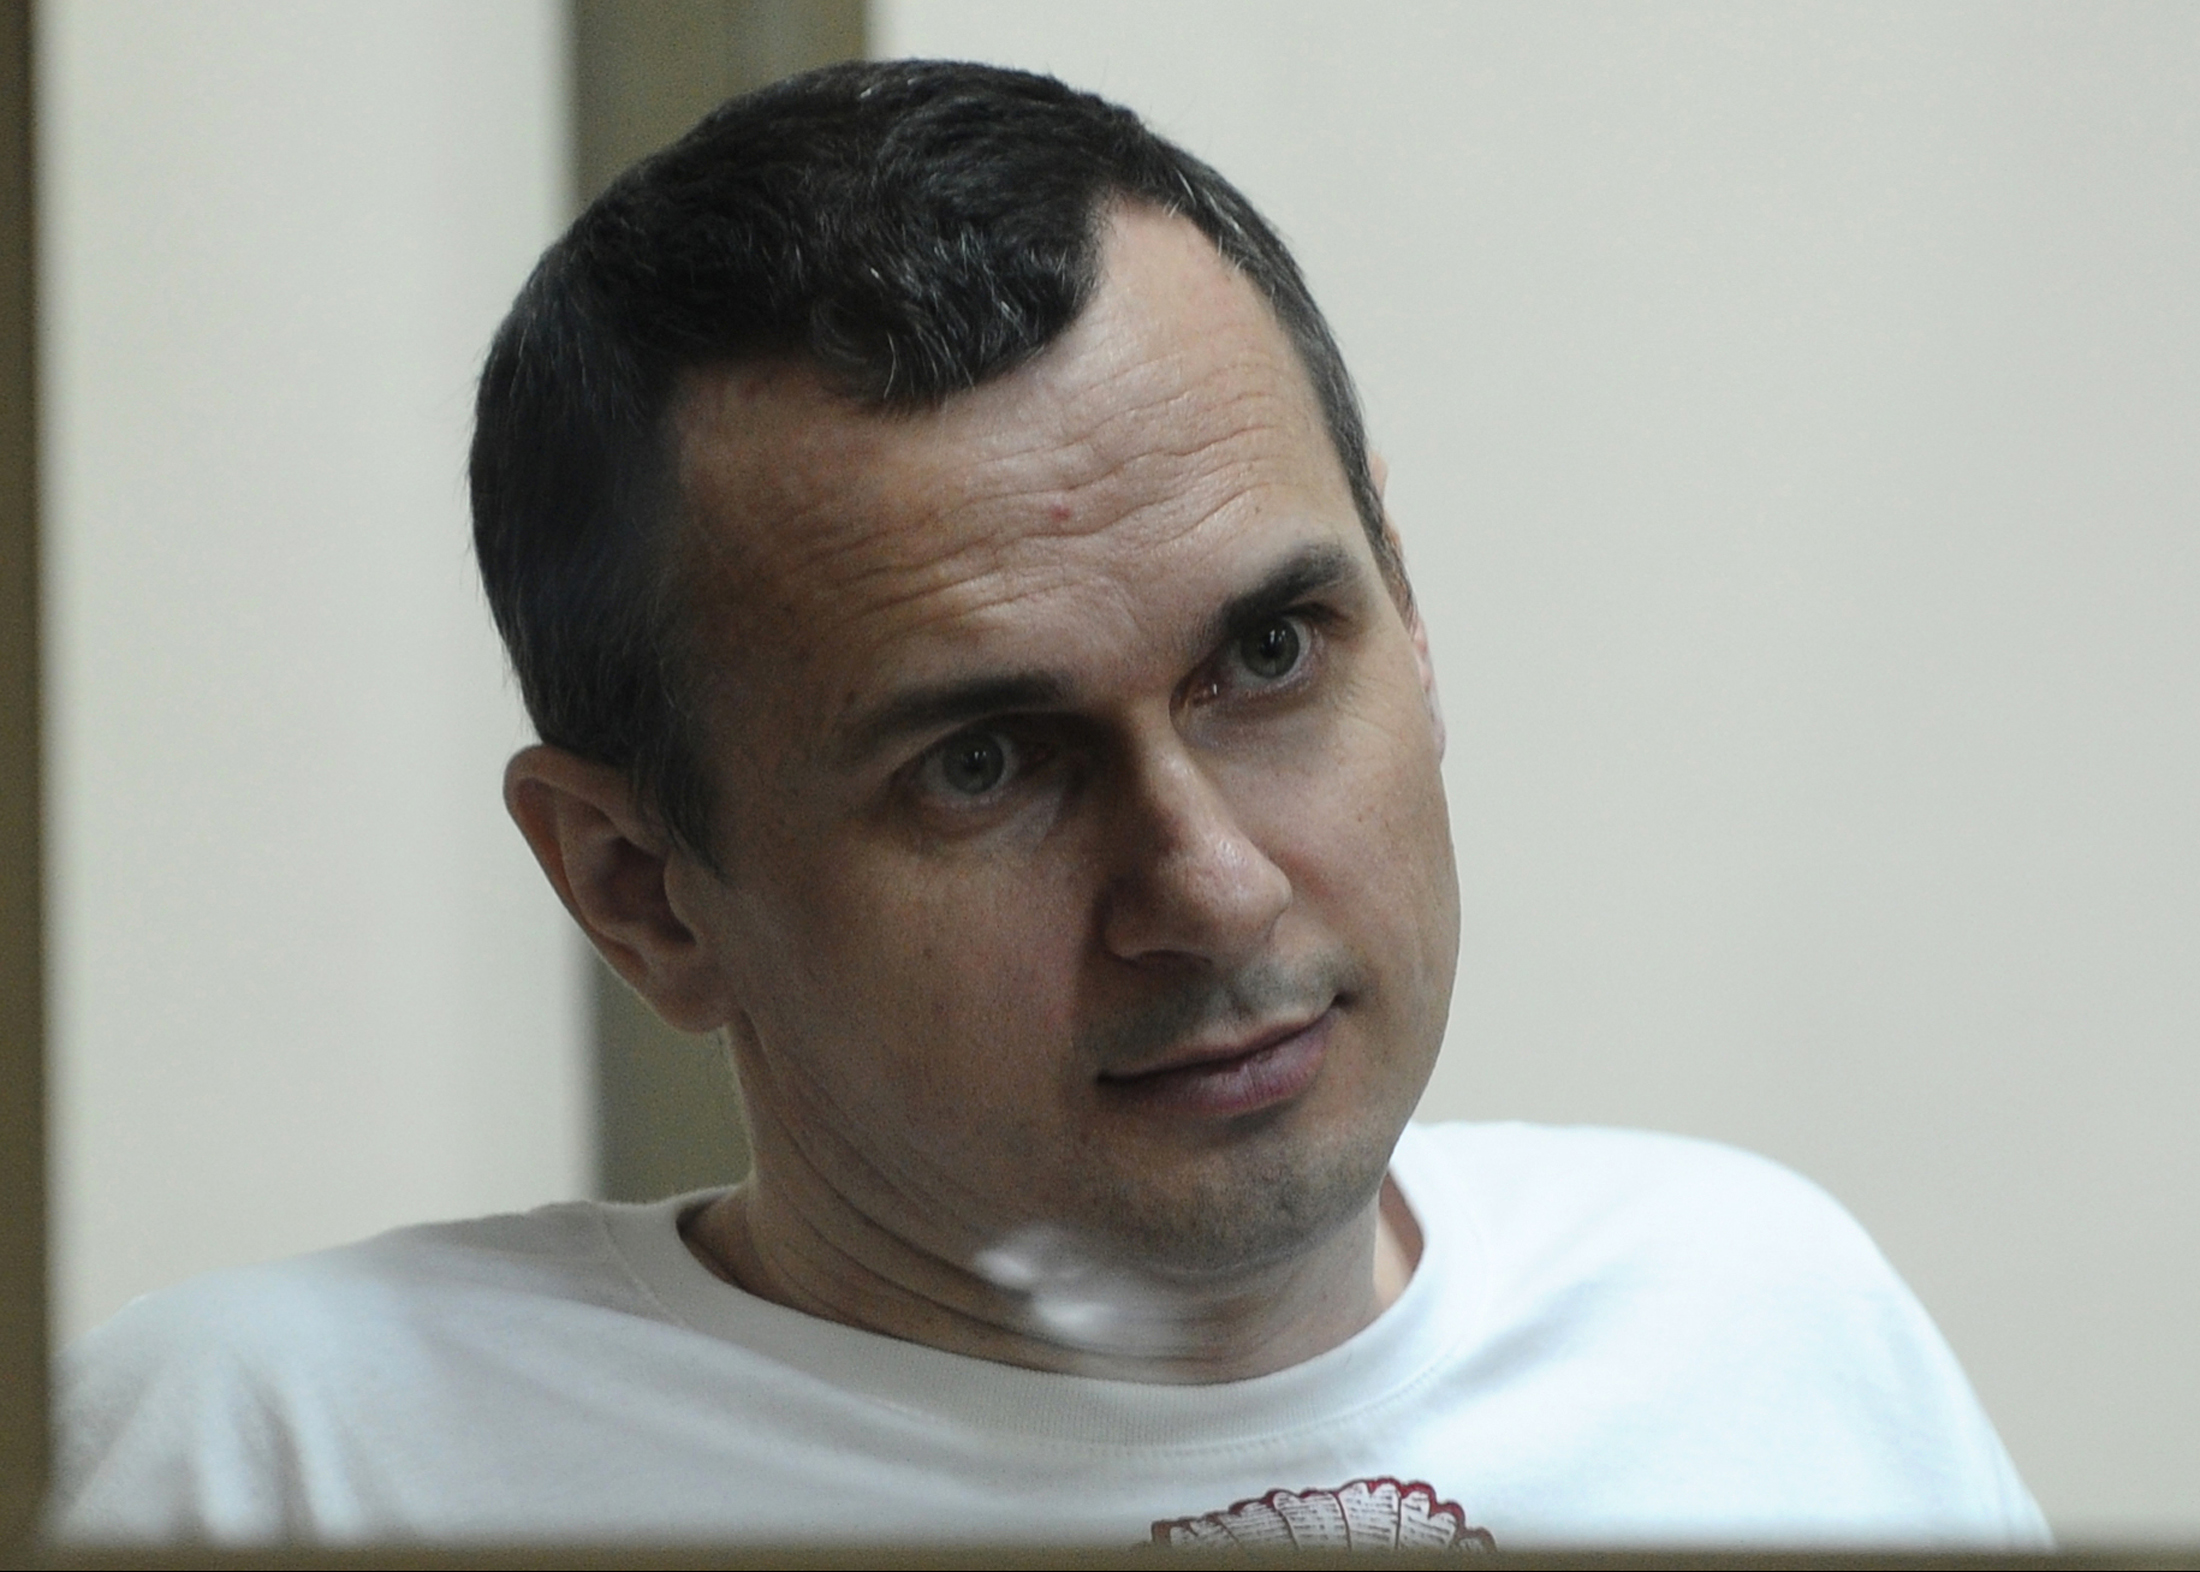 Oleg SENTSOV sits behind glass in a cage at a court room in Rostov-on-Don, Russia, Tuesday, July  21, 2015. A Ukrainian filmmaker who has been in jail for over a year now has pleaded not guilty to charges of conspiracy to commit terrorism. 39-year old Sentsov was arrested in Crimea's capital in May 2014 after a pro-Ukrainian rally protesting Russians annexation of Crimea in March that year.